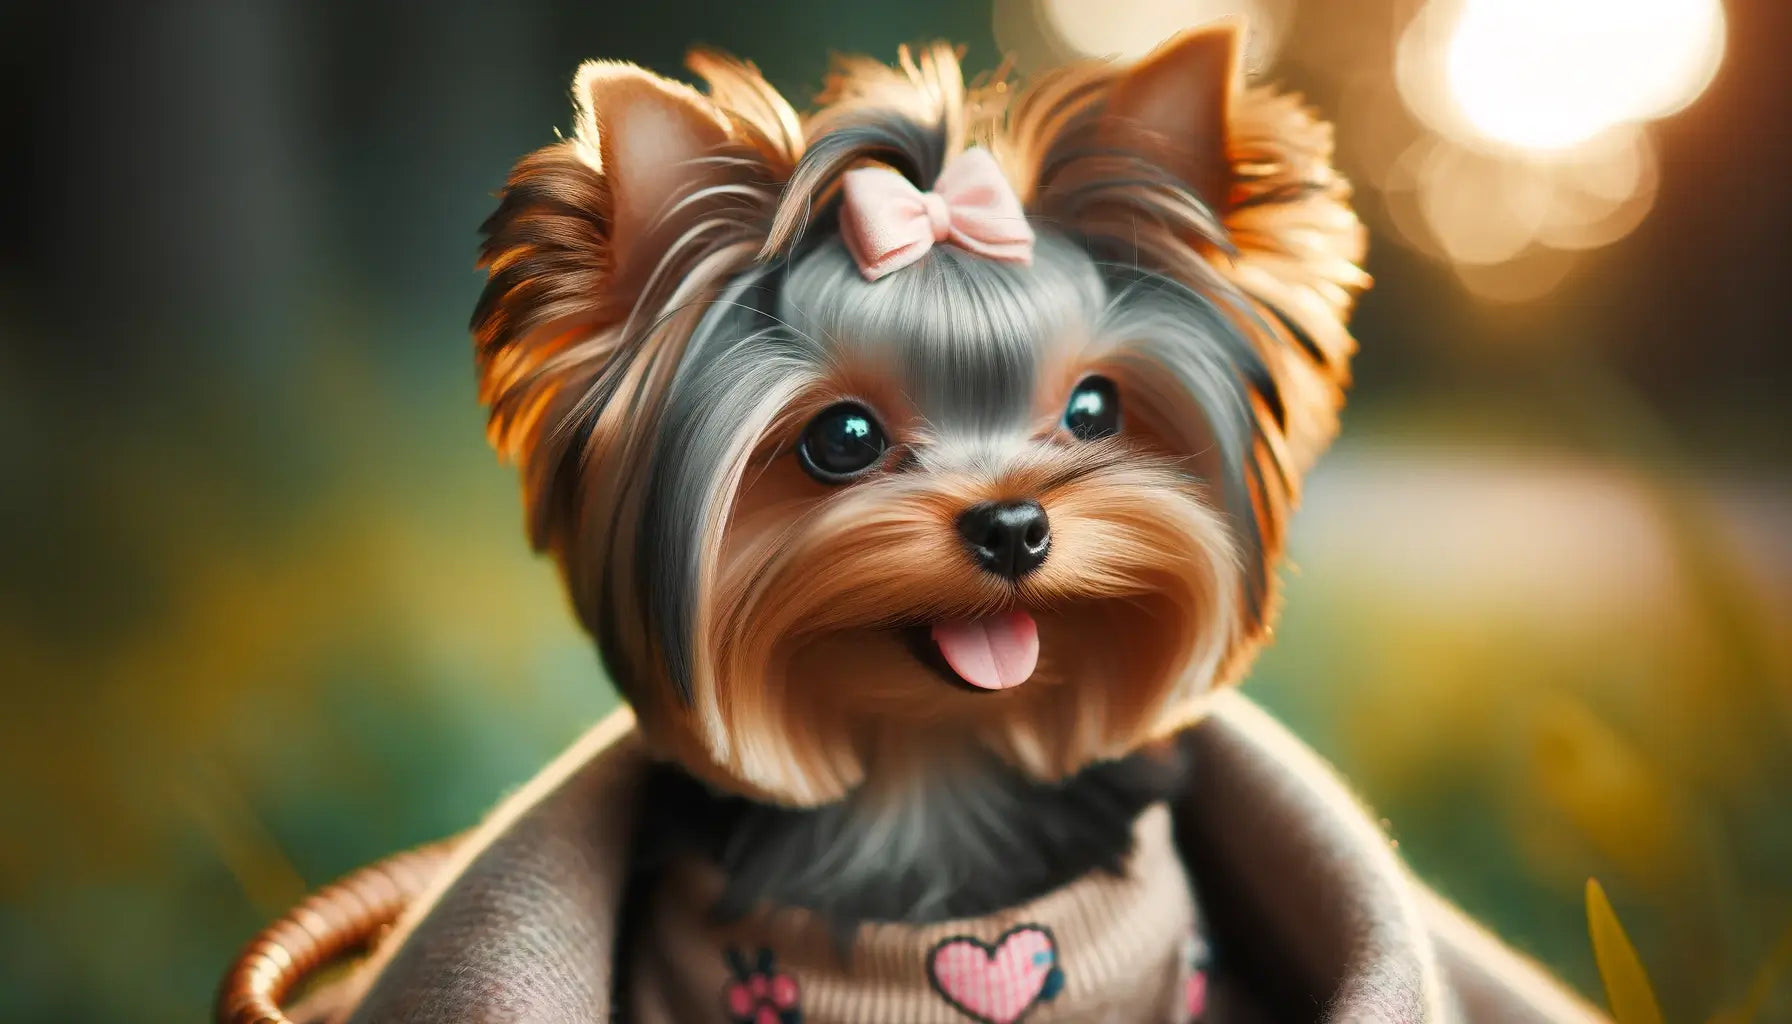 A Teacup Yorkie enjoys the outdoors, its coat shimmering in the natural light.